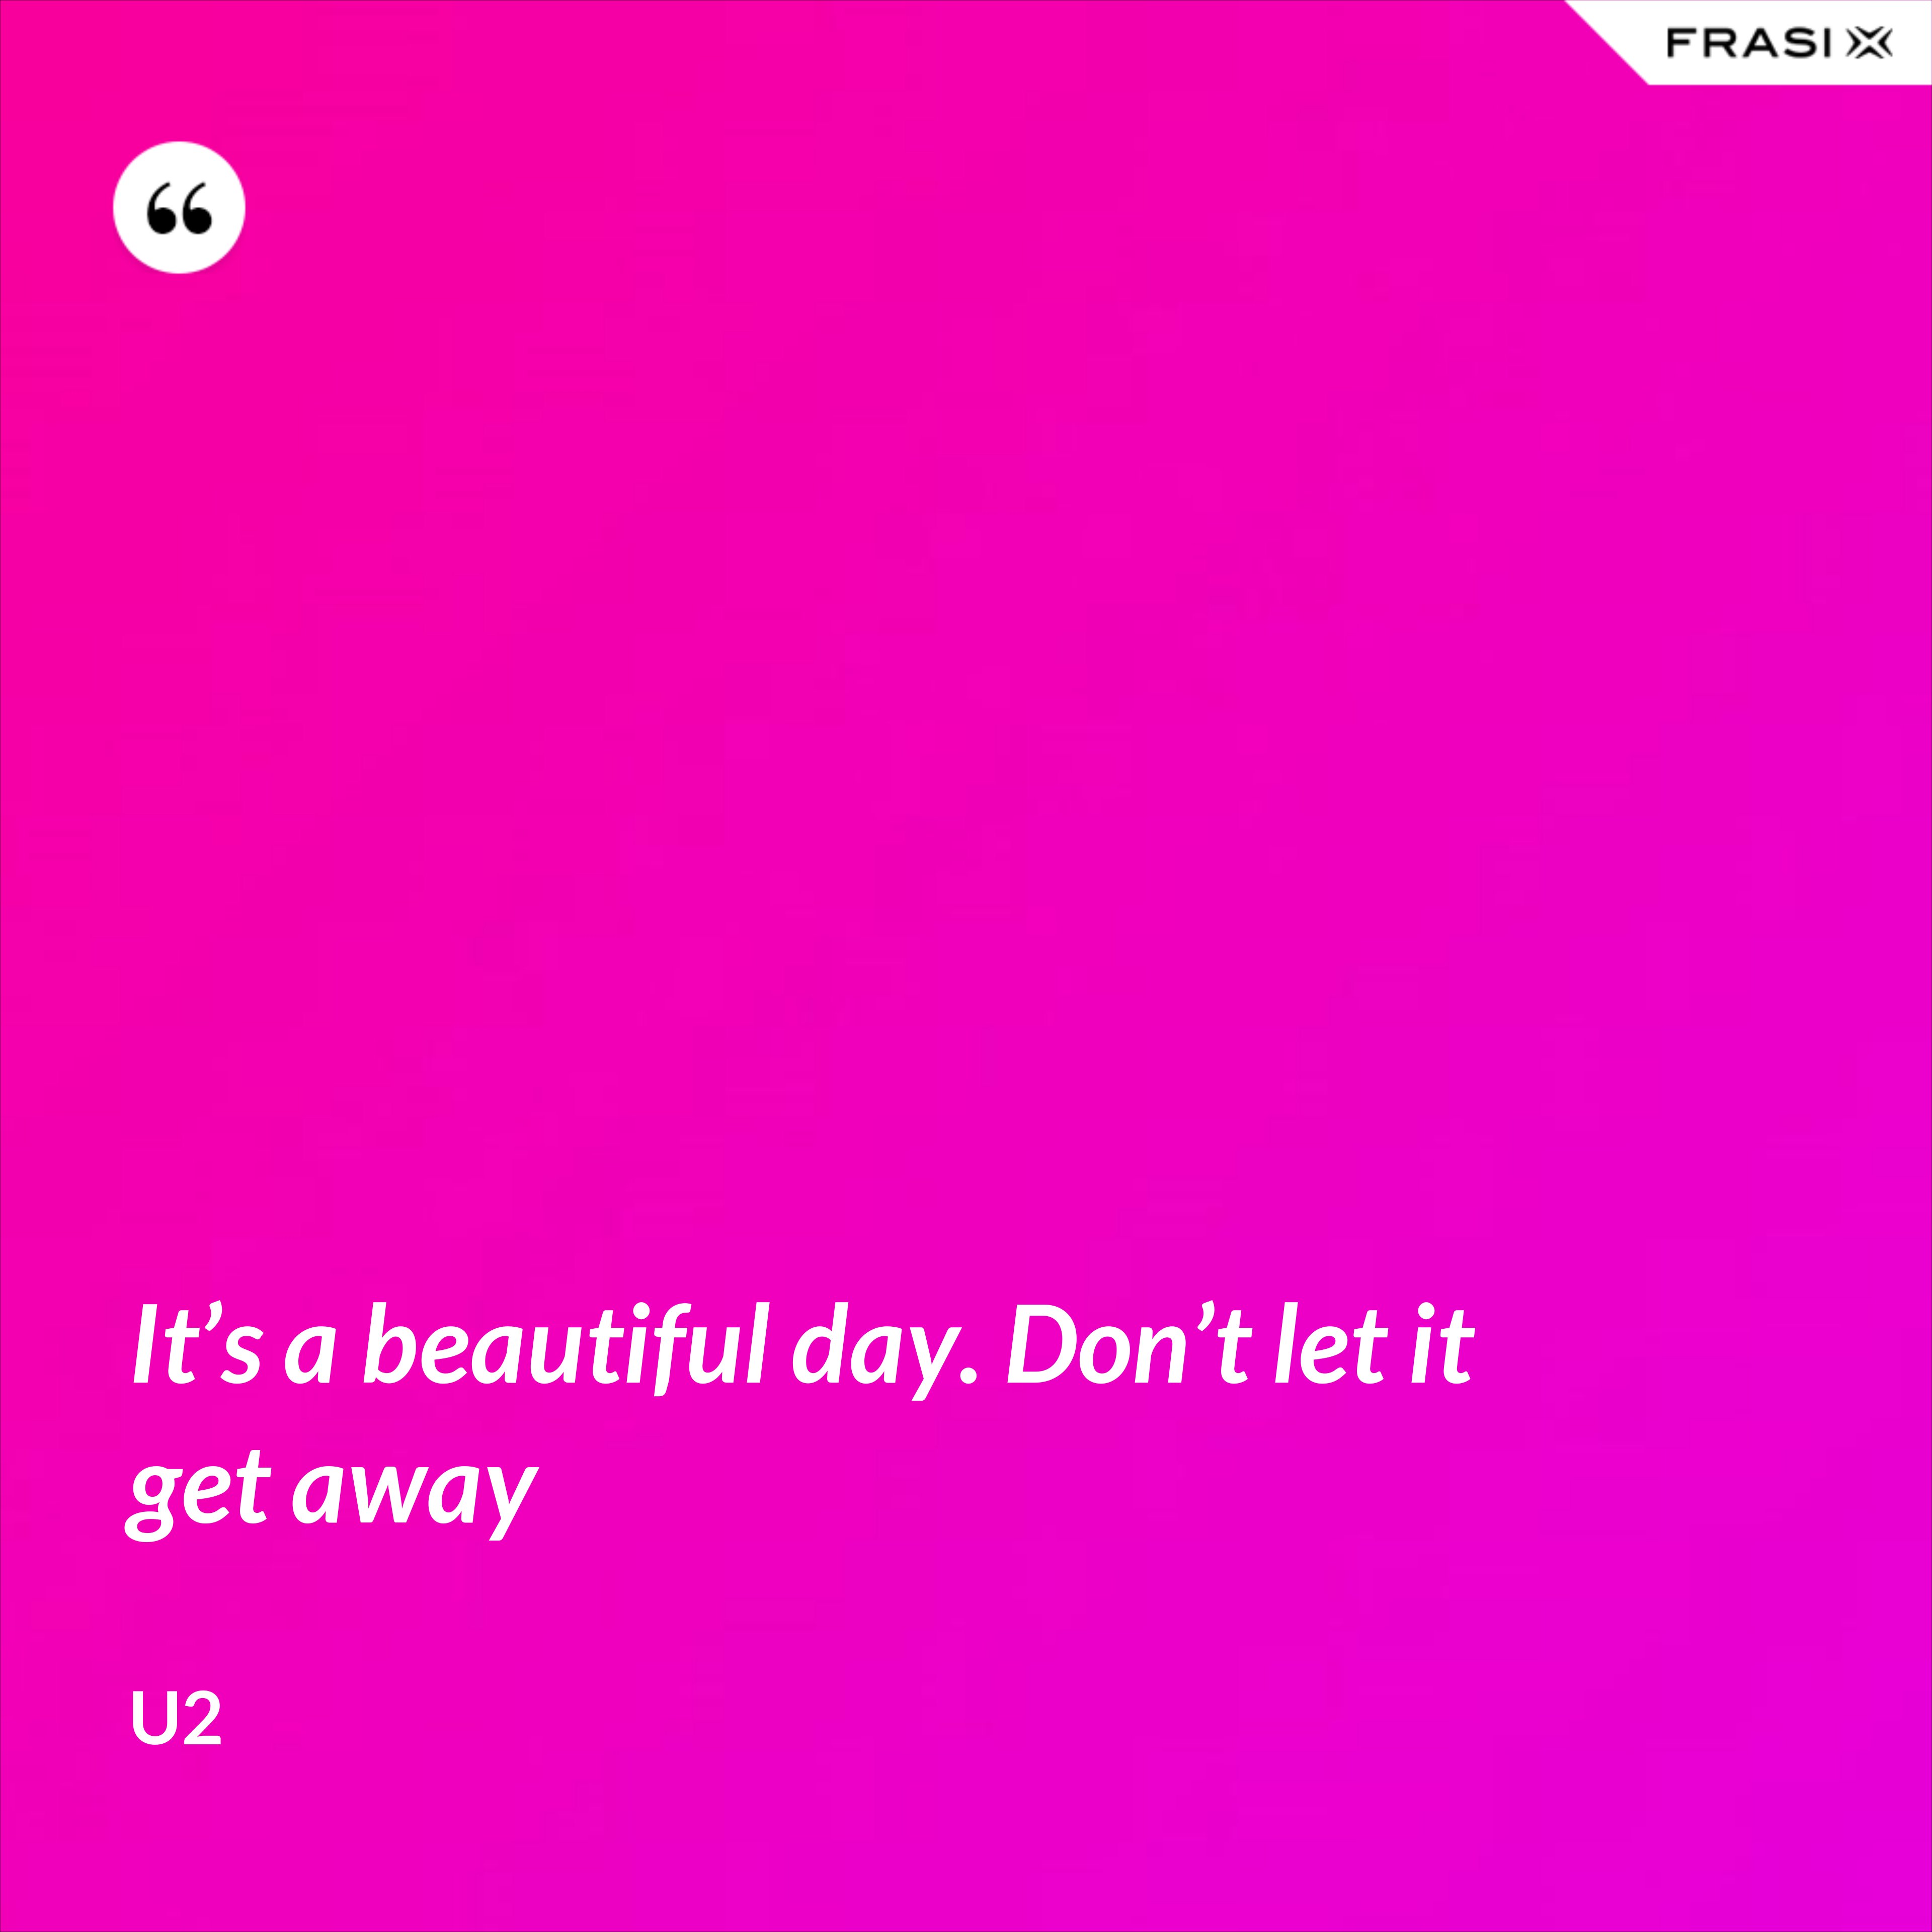 It’s a beautiful day. Don’t let it get away - U2